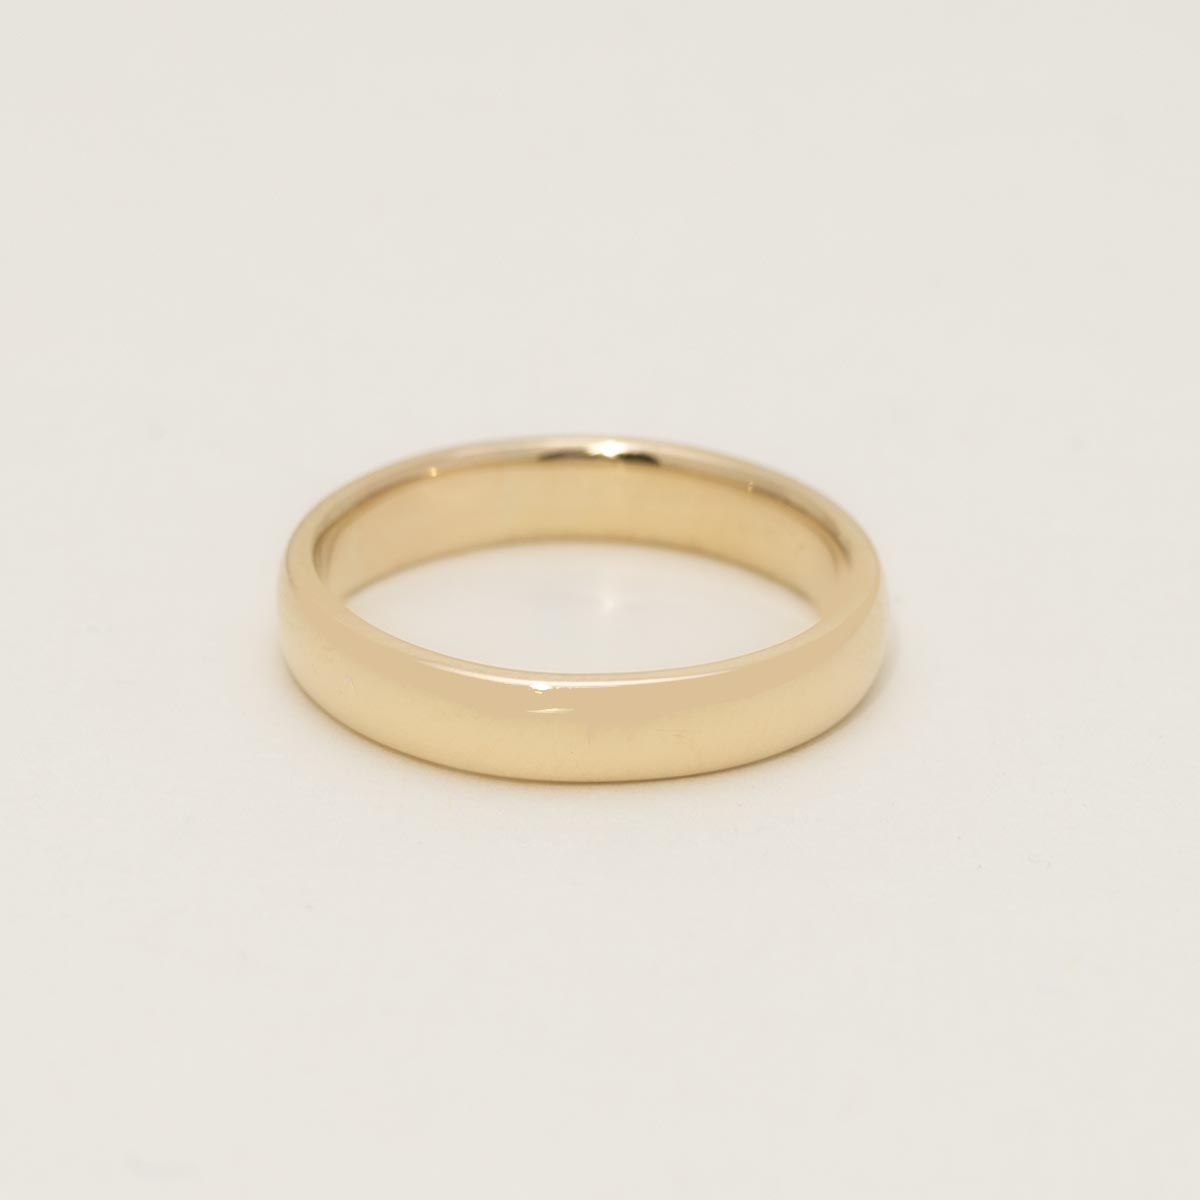 Estate Wedding Band in 14kt Yellow Gold (4mm)